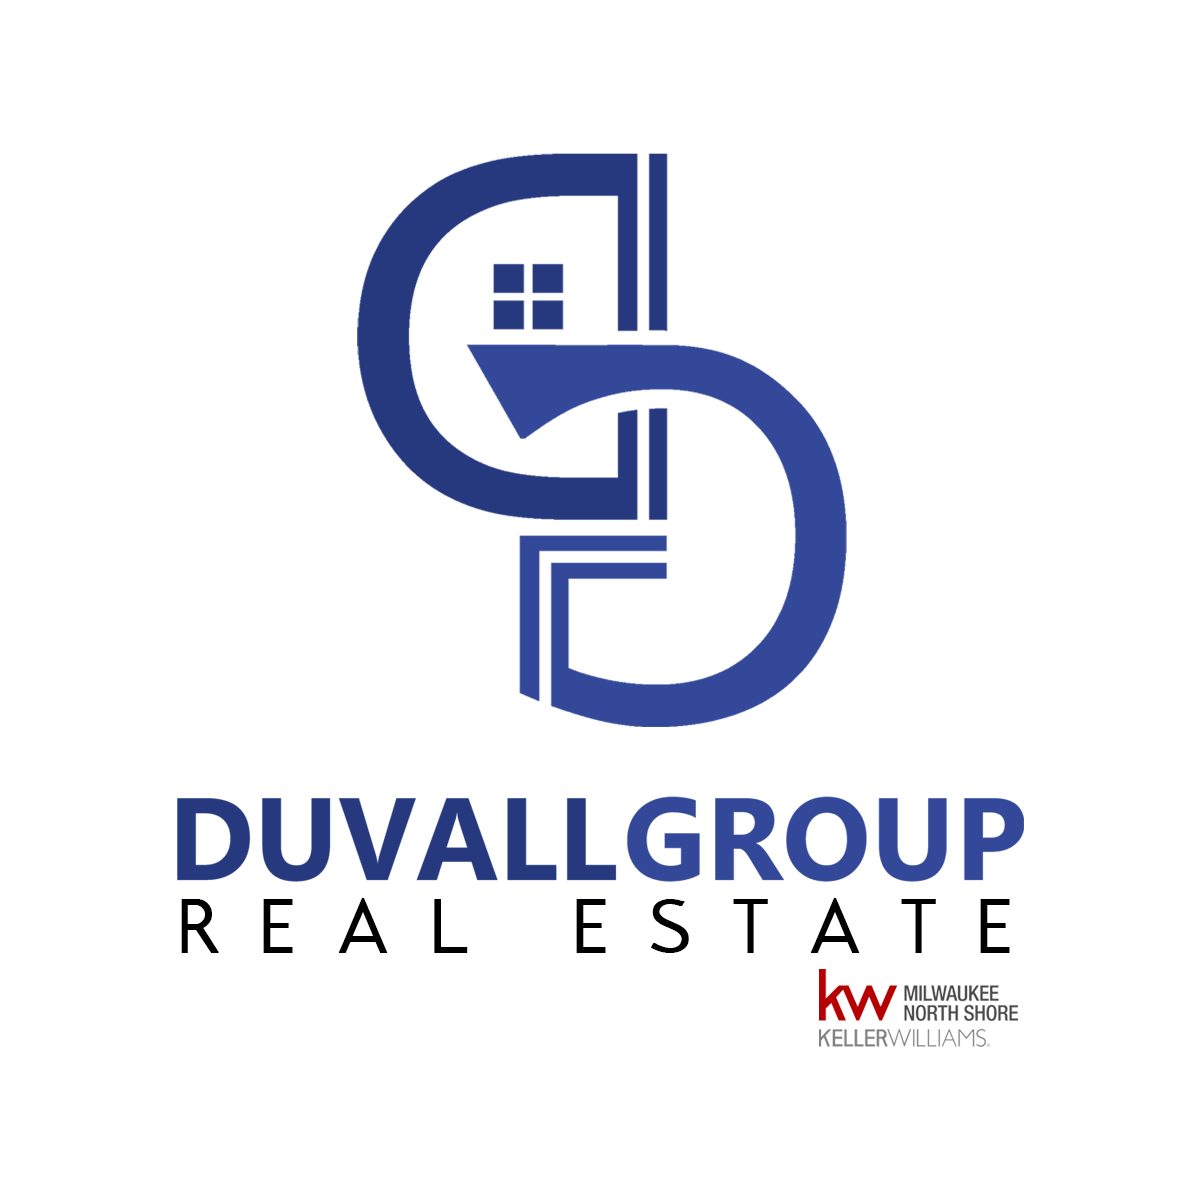 Duvall Group Real Estate